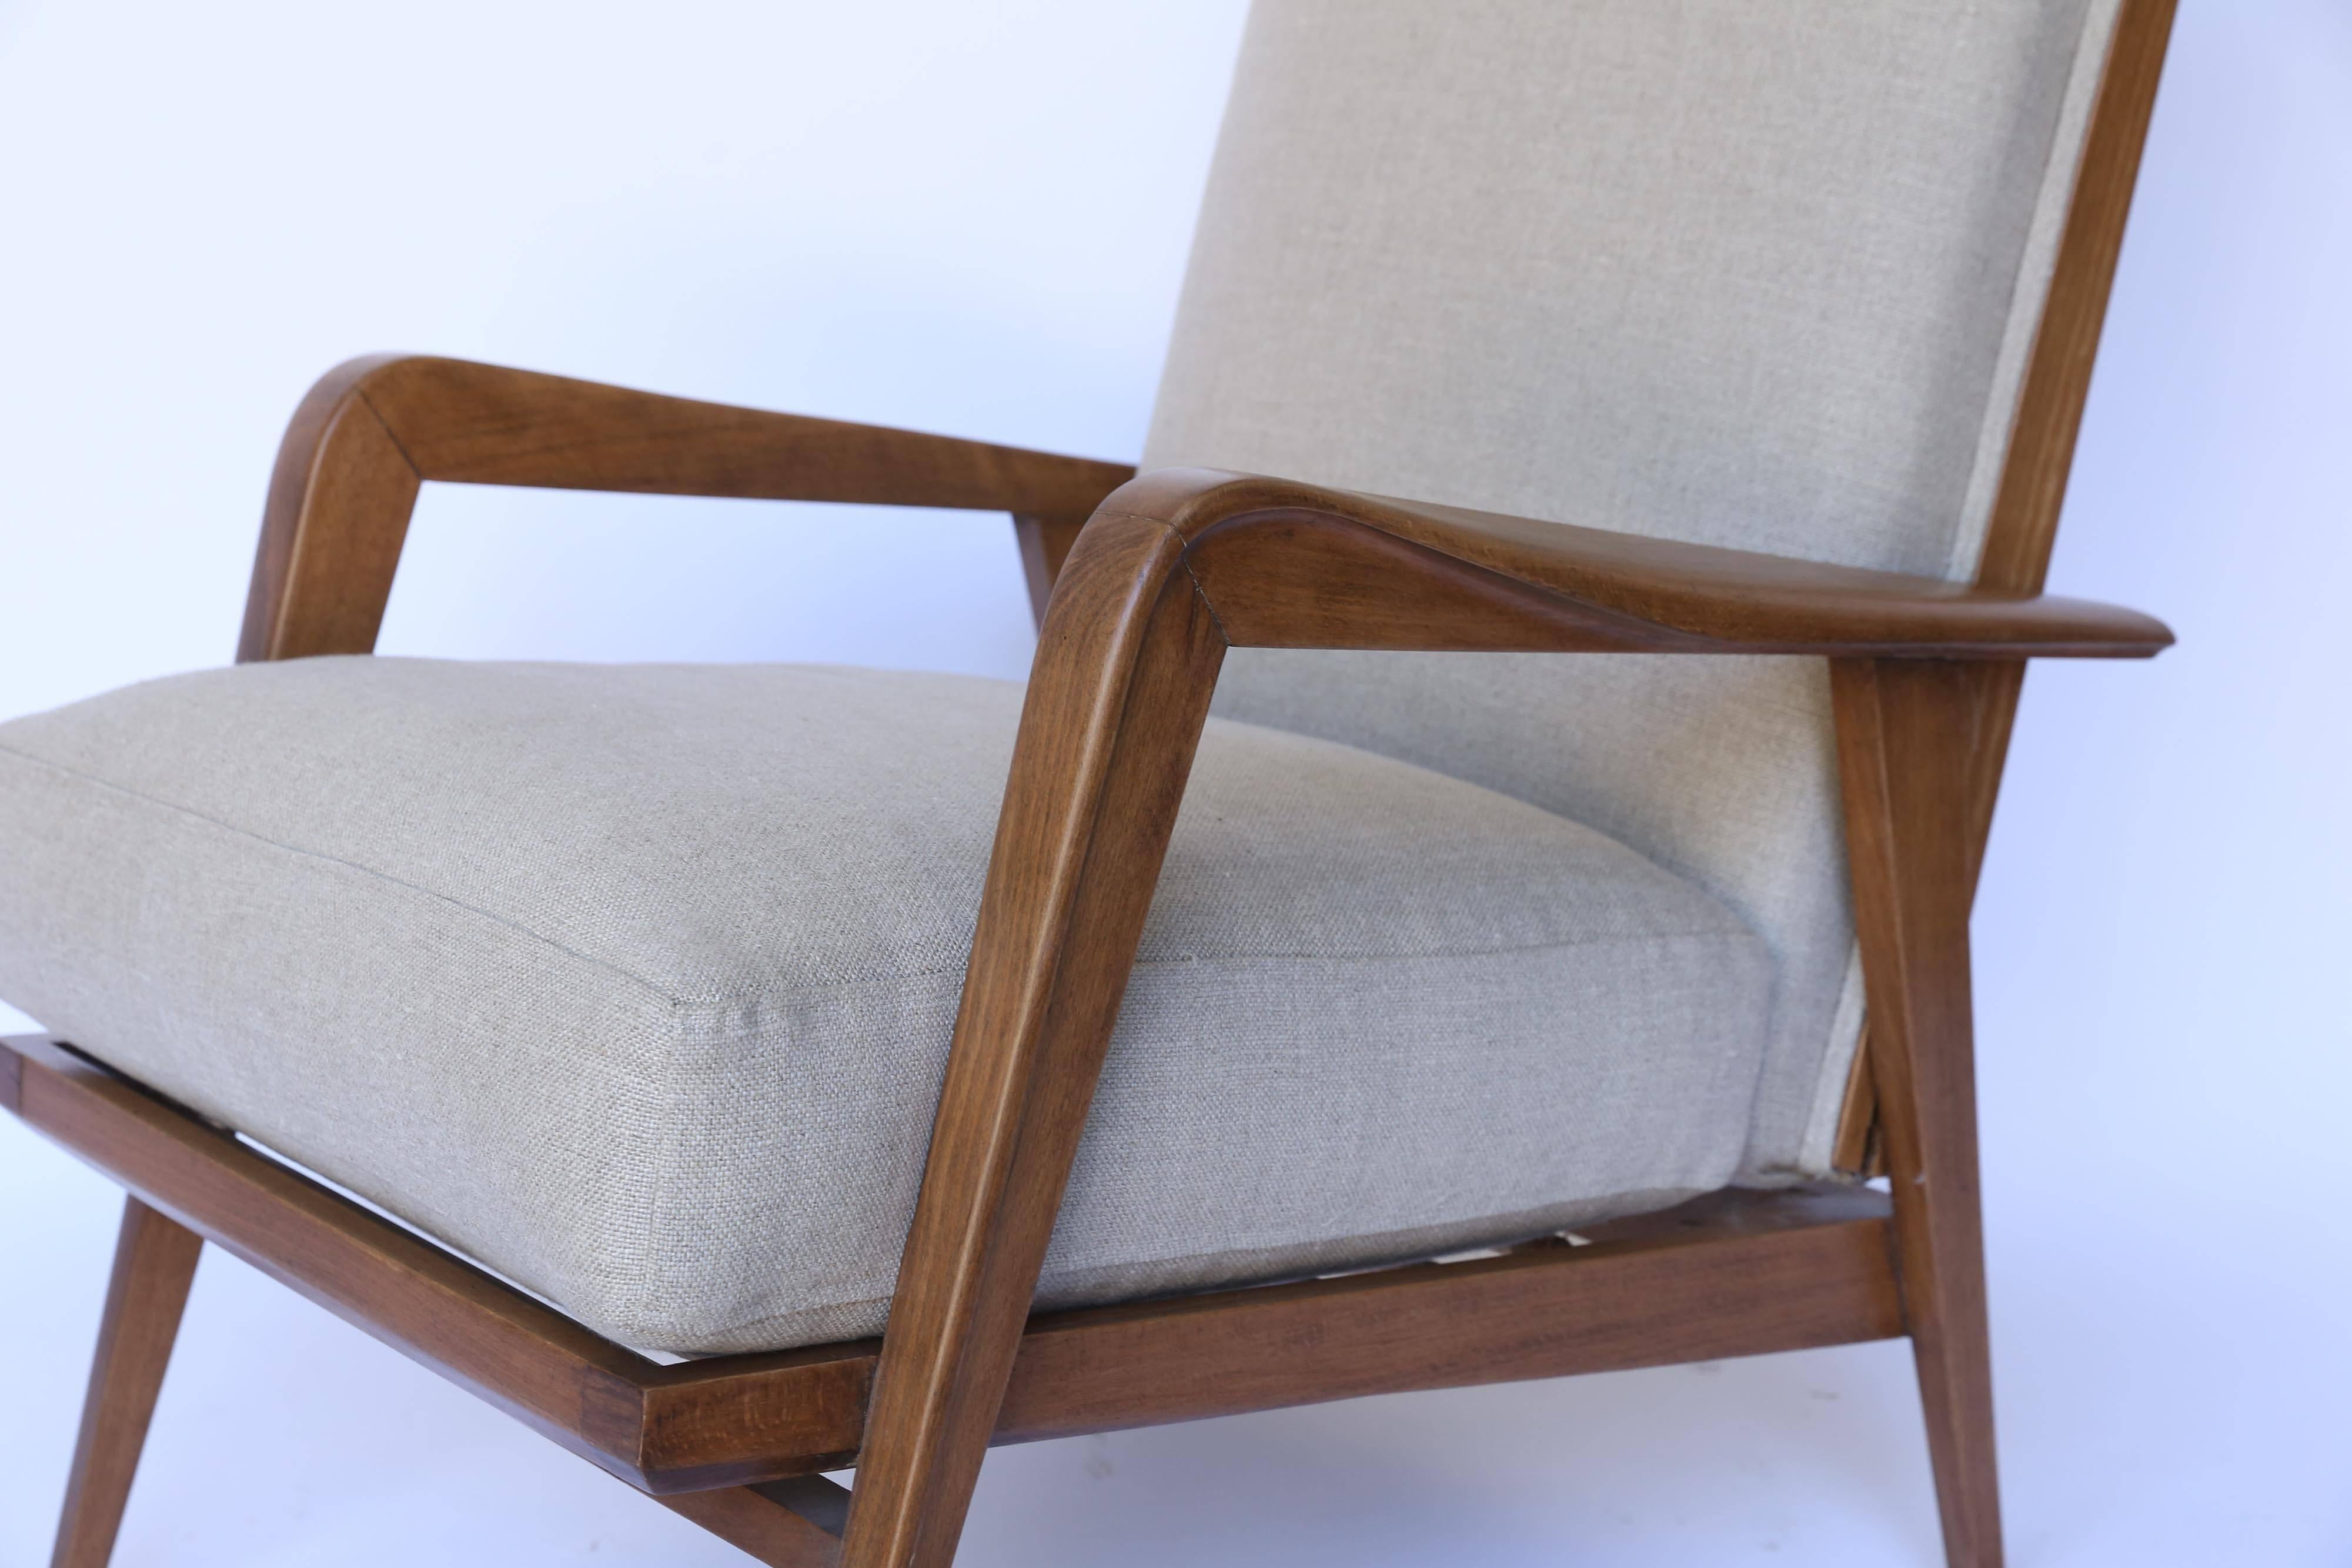 Newly upholstered in linen, a wonderful pair of Danish Modern reclining chairs in the style of Milo Baughman. With an attached back and loose cushion seat, these sophisticated chairs lend themselves to a variety of living spaces. Strong and sturdy